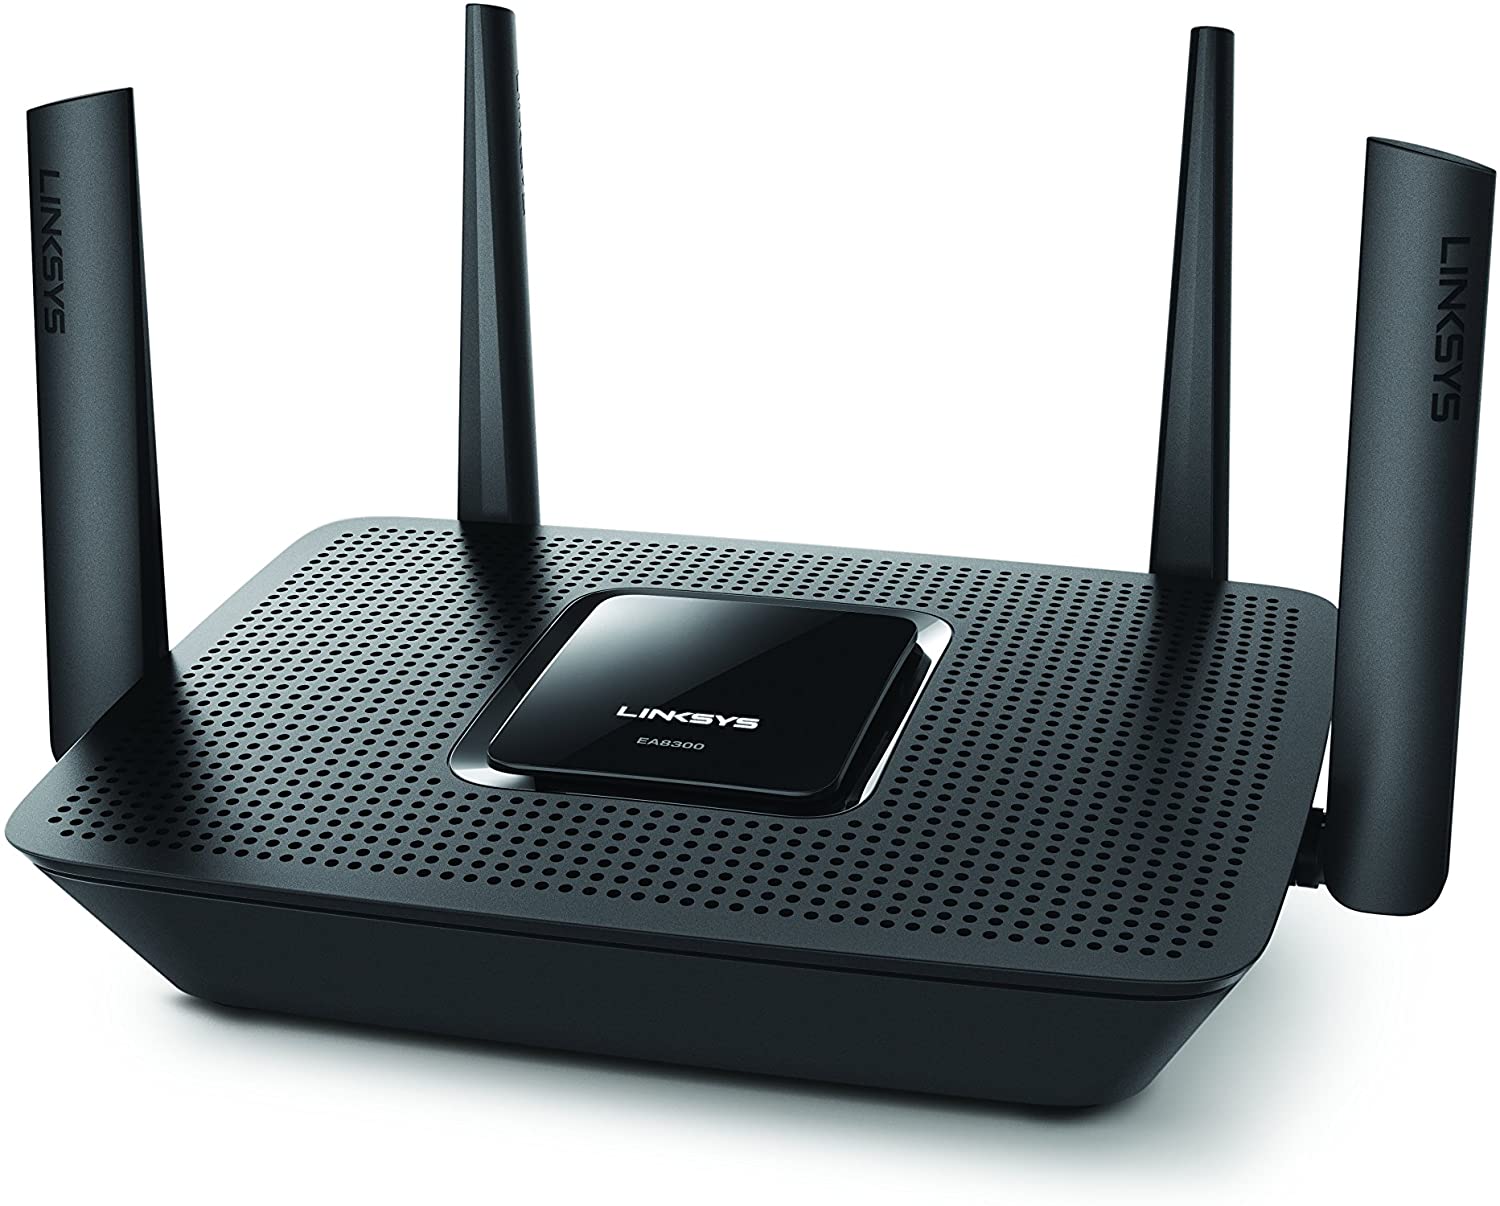 Linksys EA8300 Max - Stream AC2200 Tri-Band Router